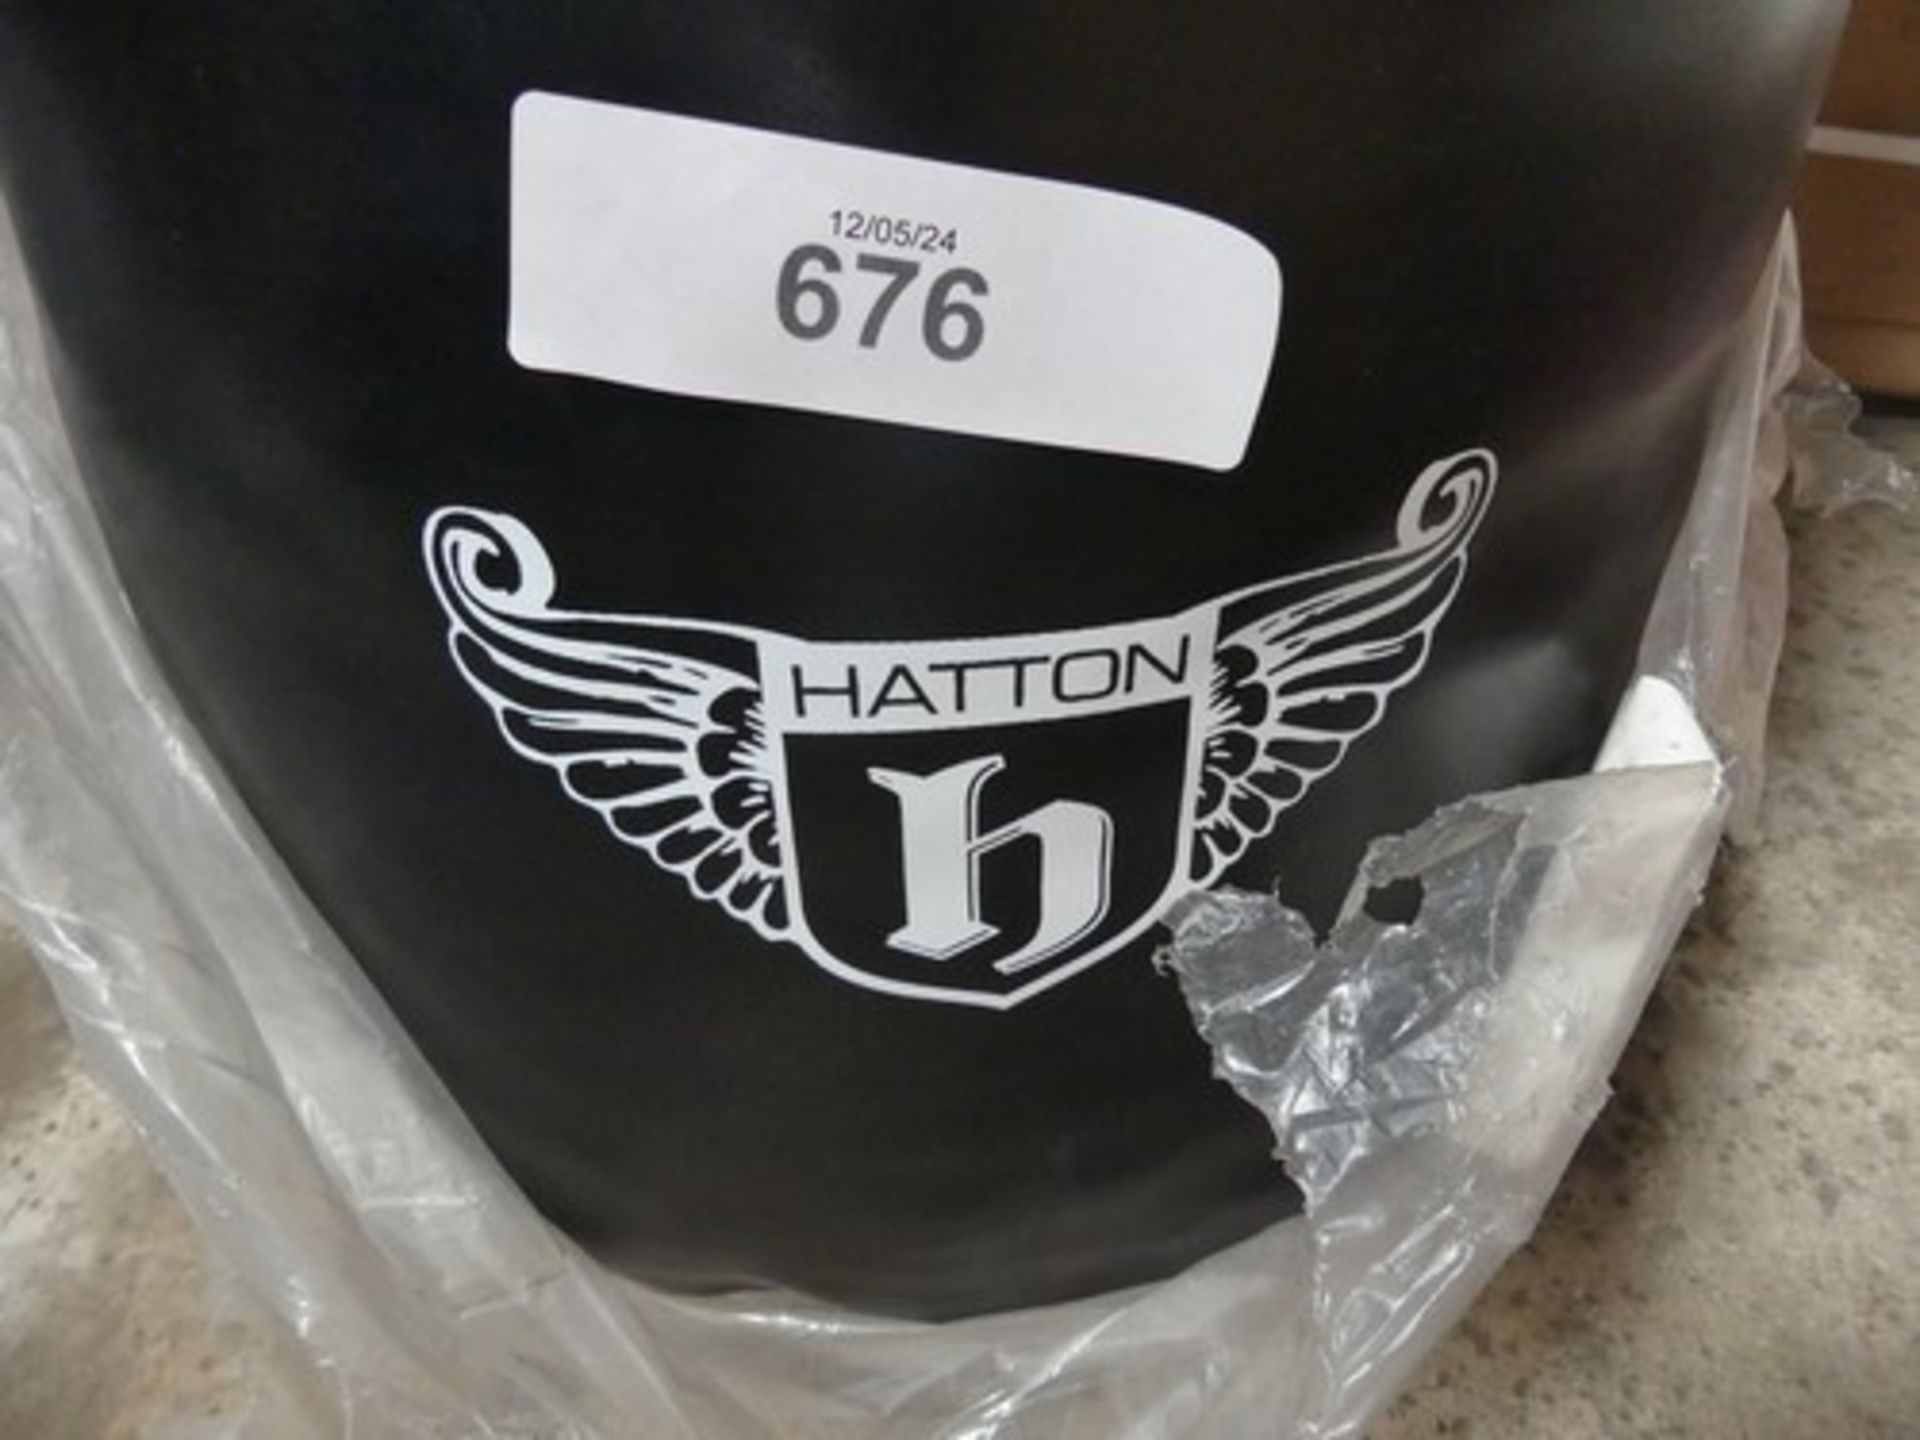 1 x Hatton punch bag - new (TS) - Image 2 of 2